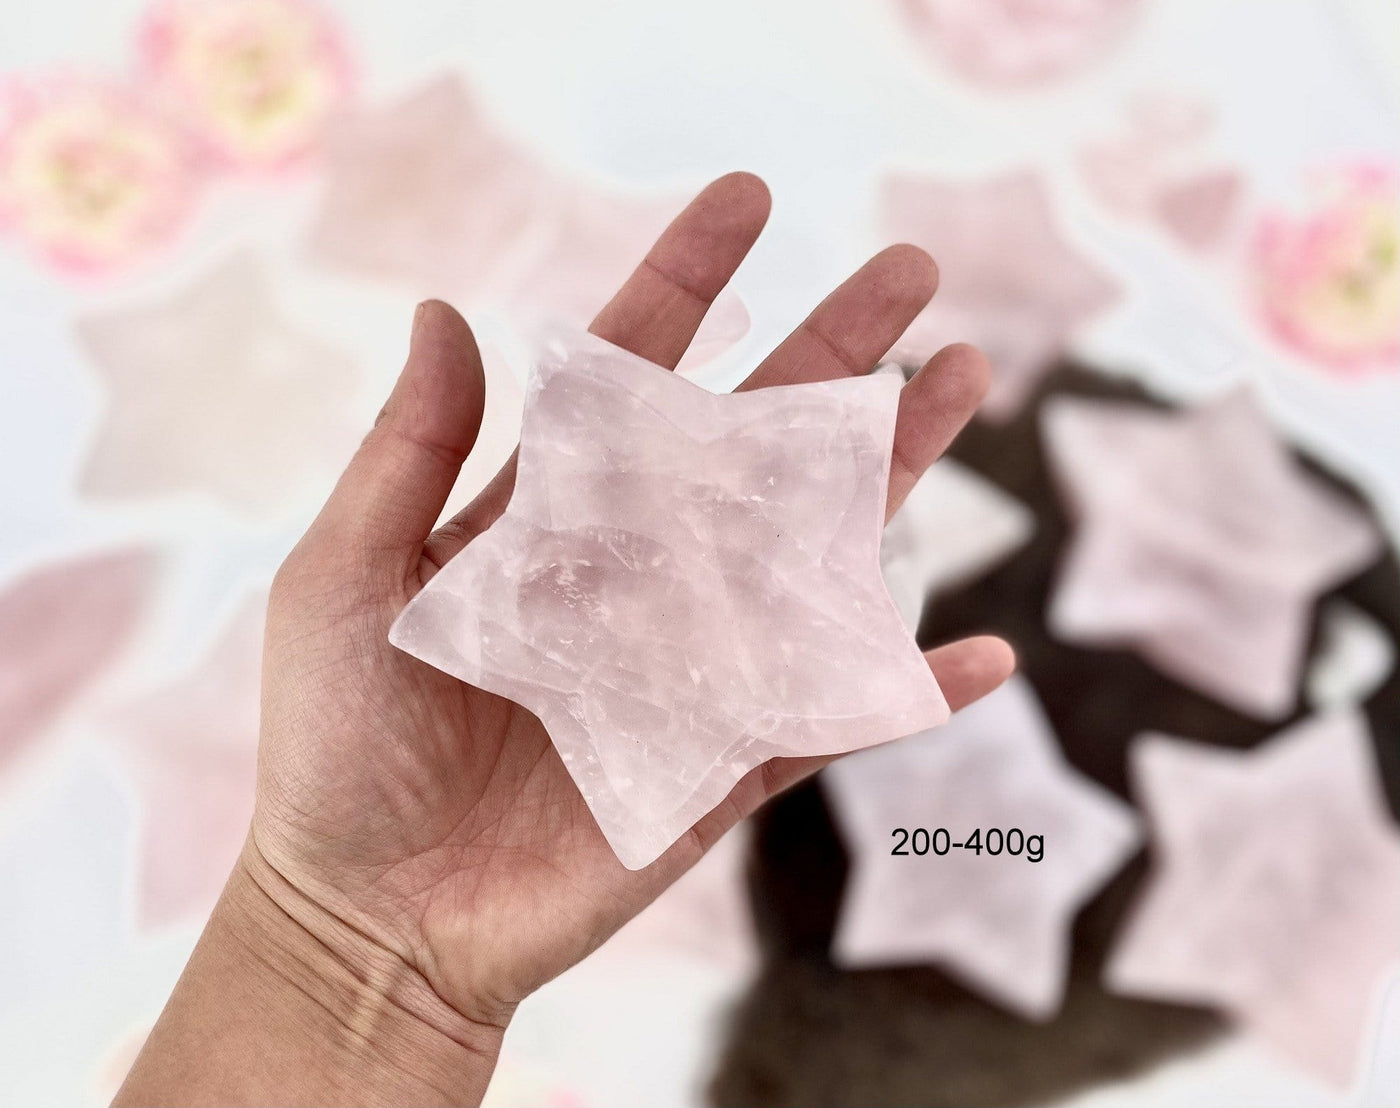 Hand holding up 200-400g Rose Quartz Stone Star Dish with others blurred in the background